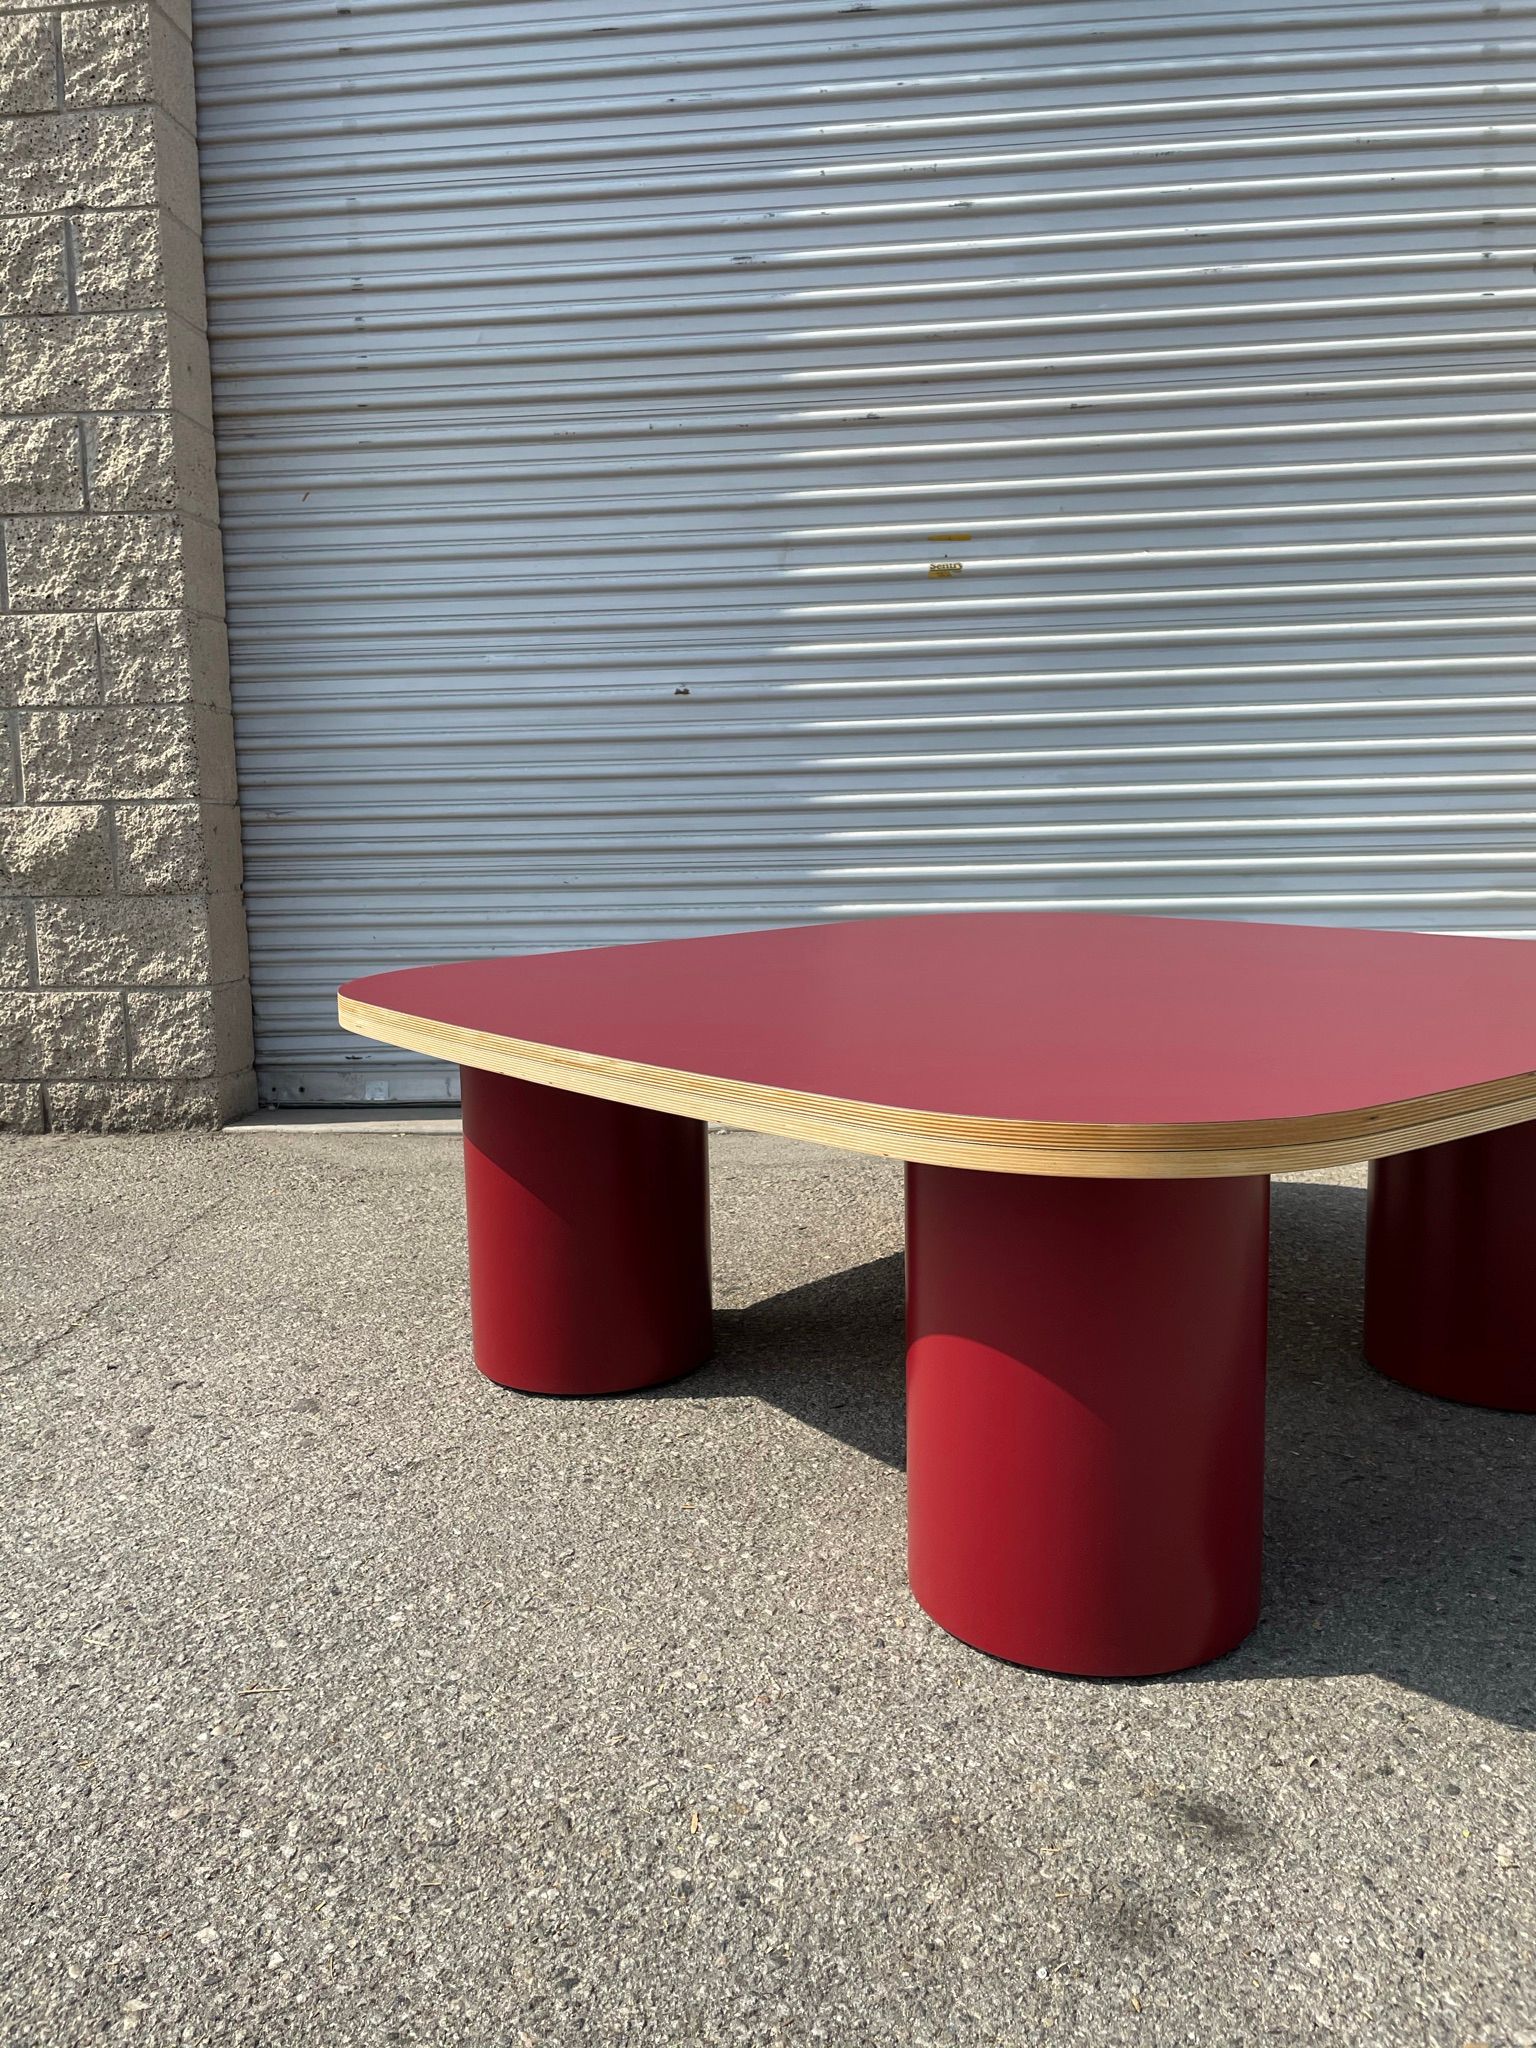  Four Cylinder Coffee Table product image 3